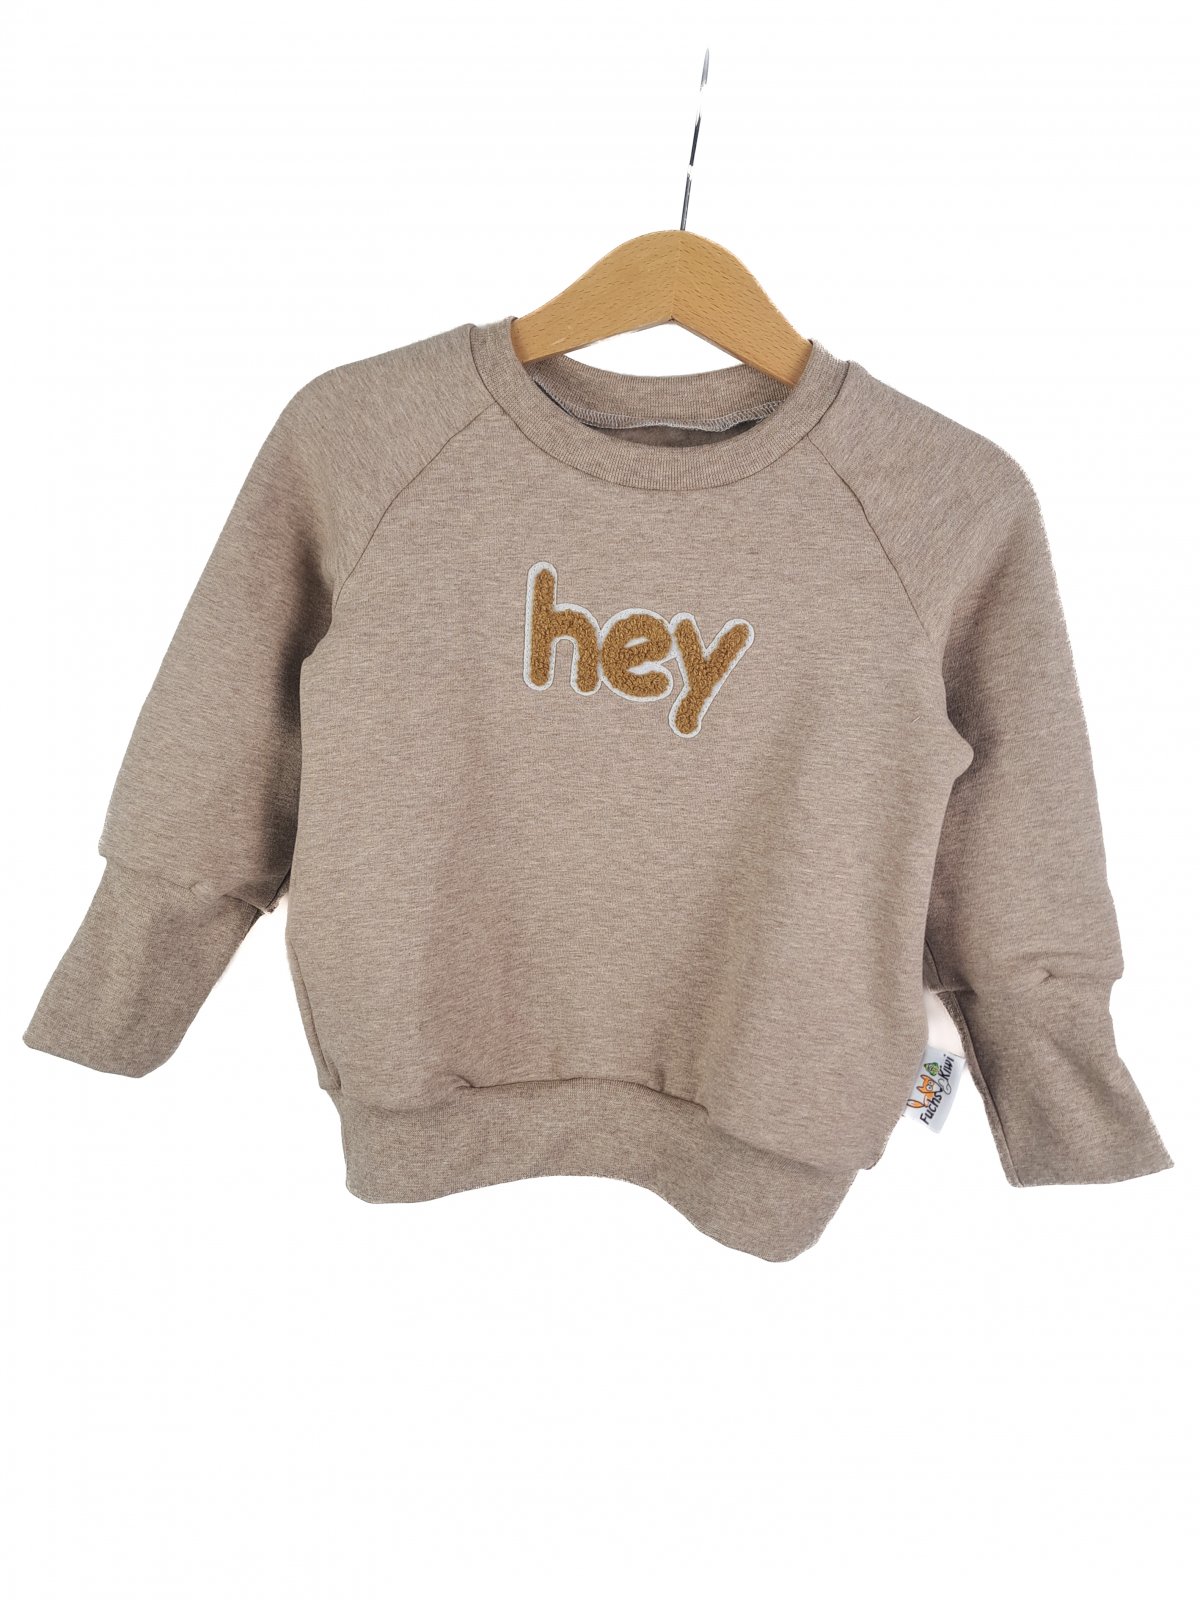 Pullover Hey-Patch sand 74/80